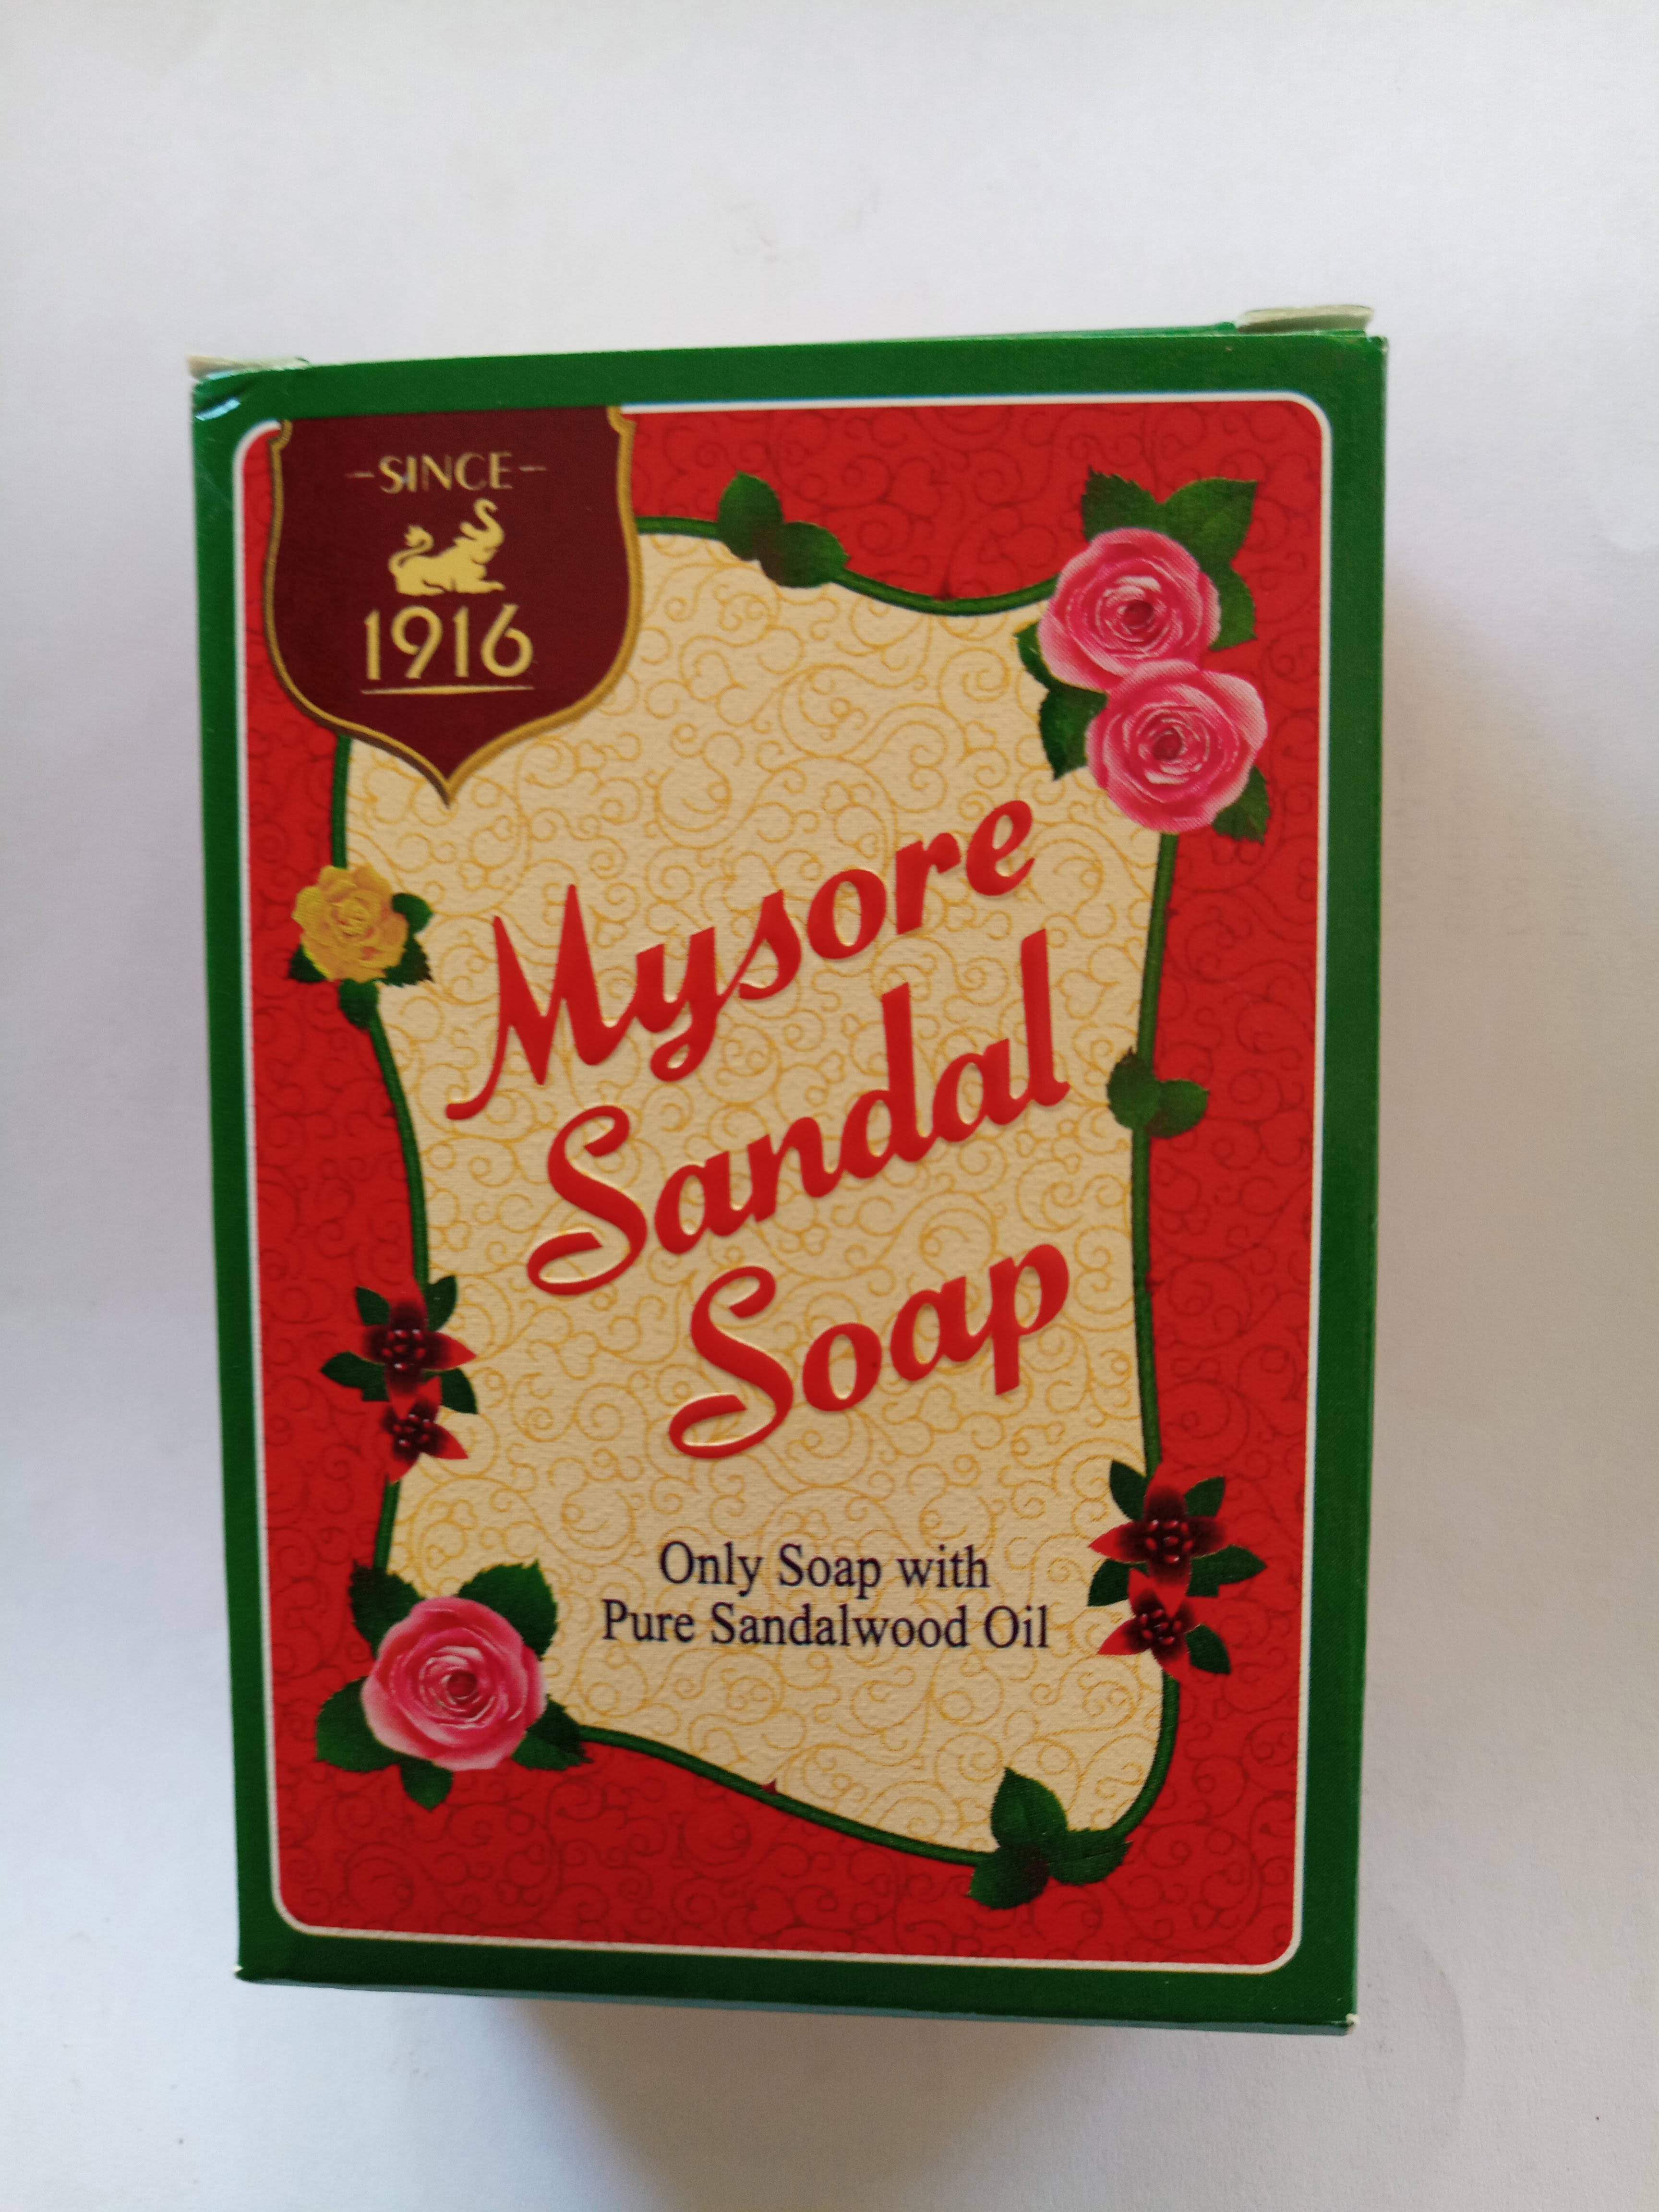 How Mysore Sandal soap's century-old legacy was threatened by counterfeit  operation - The Hindu